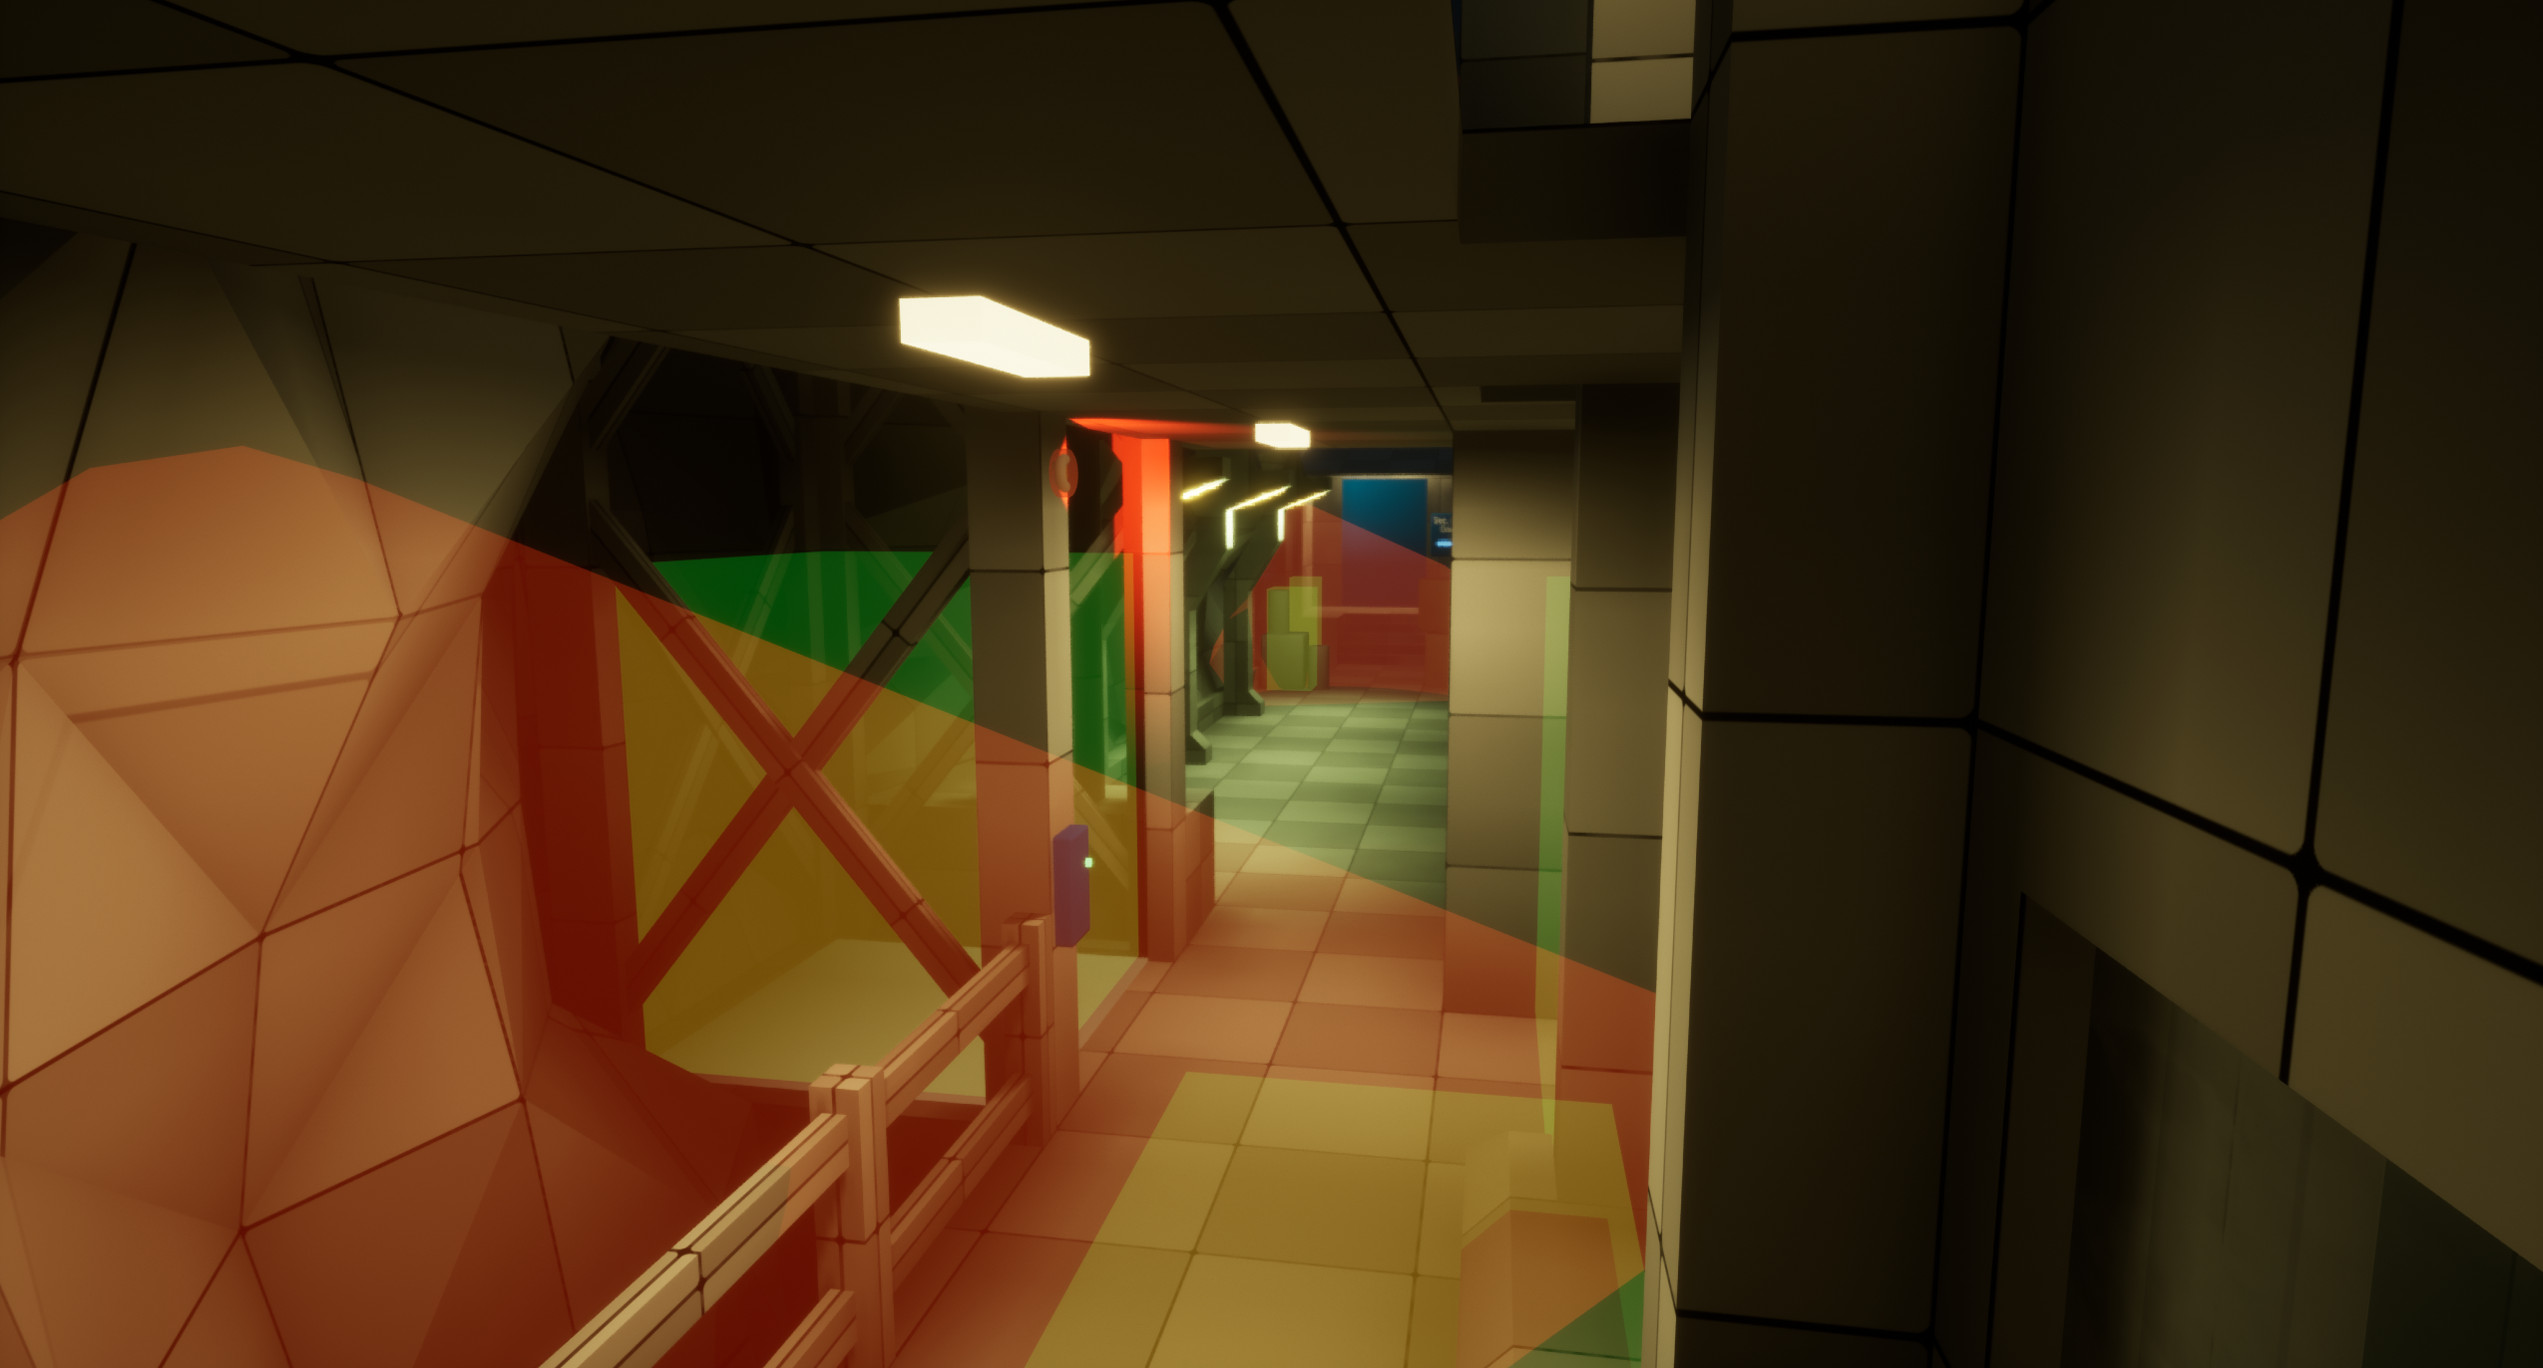 An early area in the level where the player must sneak through a narrow utility area.